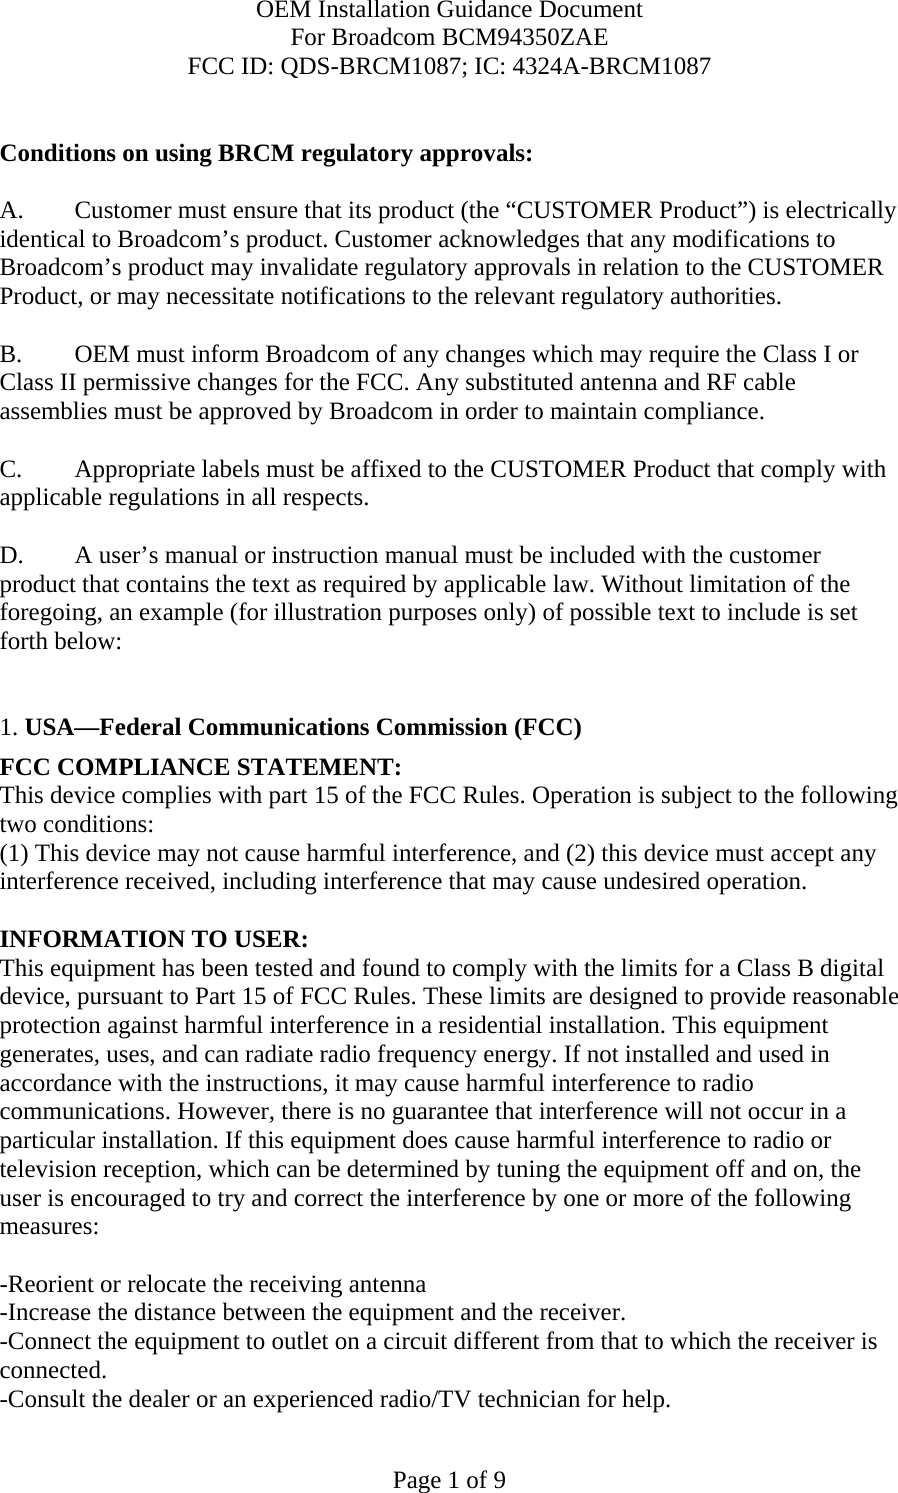 OEM Installation Guidance Document For Broadcom BCM94350ZAE FCC ID: QDS-BRCM1087; IC: 4324A-BRCM1087  Page 1 of 9  Conditions on using BRCM regulatory approvals:   A.  Customer must ensure that its product (the “CUSTOMER Product”) is electrically identical to Broadcom’s product. Customer acknowledges that any modifications to Broadcom’s product may invalidate regulatory approvals in relation to the CUSTOMER Product, or may necessitate notifications to the relevant regulatory authorities.   B.   OEM must inform Broadcom of any changes which may require the Class I or Class II permissive changes for the FCC. Any substituted antenna and RF cable assemblies must be approved by Broadcom in order to maintain compliance.  C.  Appropriate labels must be affixed to the CUSTOMER Product that comply with  applicable regulations in all respects.    D.   A user’s manual or instruction manual must be included with the customer product that contains the text as required by applicable law. Without limitation of the foregoing, an example (for illustration purposes only) of possible text to include is set forth below:    1. USA—Federal Communications Commission (FCC) FCC COMPLIANCE STATEMENT: This device complies with part 15 of the FCC Rules. Operation is subject to the following two conditions: (1) This device may not cause harmful interference, and (2) this device must accept any interference received, including interference that may cause undesired operation.  INFORMATION TO USER: This equipment has been tested and found to comply with the limits for a Class B digital device, pursuant to Part 15 of FCC Rules. These limits are designed to provide reasonable protection against harmful interference in a residential installation. This equipment generates, uses, and can radiate radio frequency energy. If not installed and used in accordance with the instructions, it may cause harmful interference to radio communications. However, there is no guarantee that interference will not occur in a particular installation. If this equipment does cause harmful interference to radio or television reception, which can be determined by tuning the equipment off and on, the user is encouraged to try and correct the interference by one or more of the following measures:   -Reorient or relocate the receiving antenna -Increase the distance between the equipment and the receiver. -Connect the equipment to outlet on a circuit different from that to which the receiver is connected. -Consult the dealer or an experienced radio/TV technician for help. 